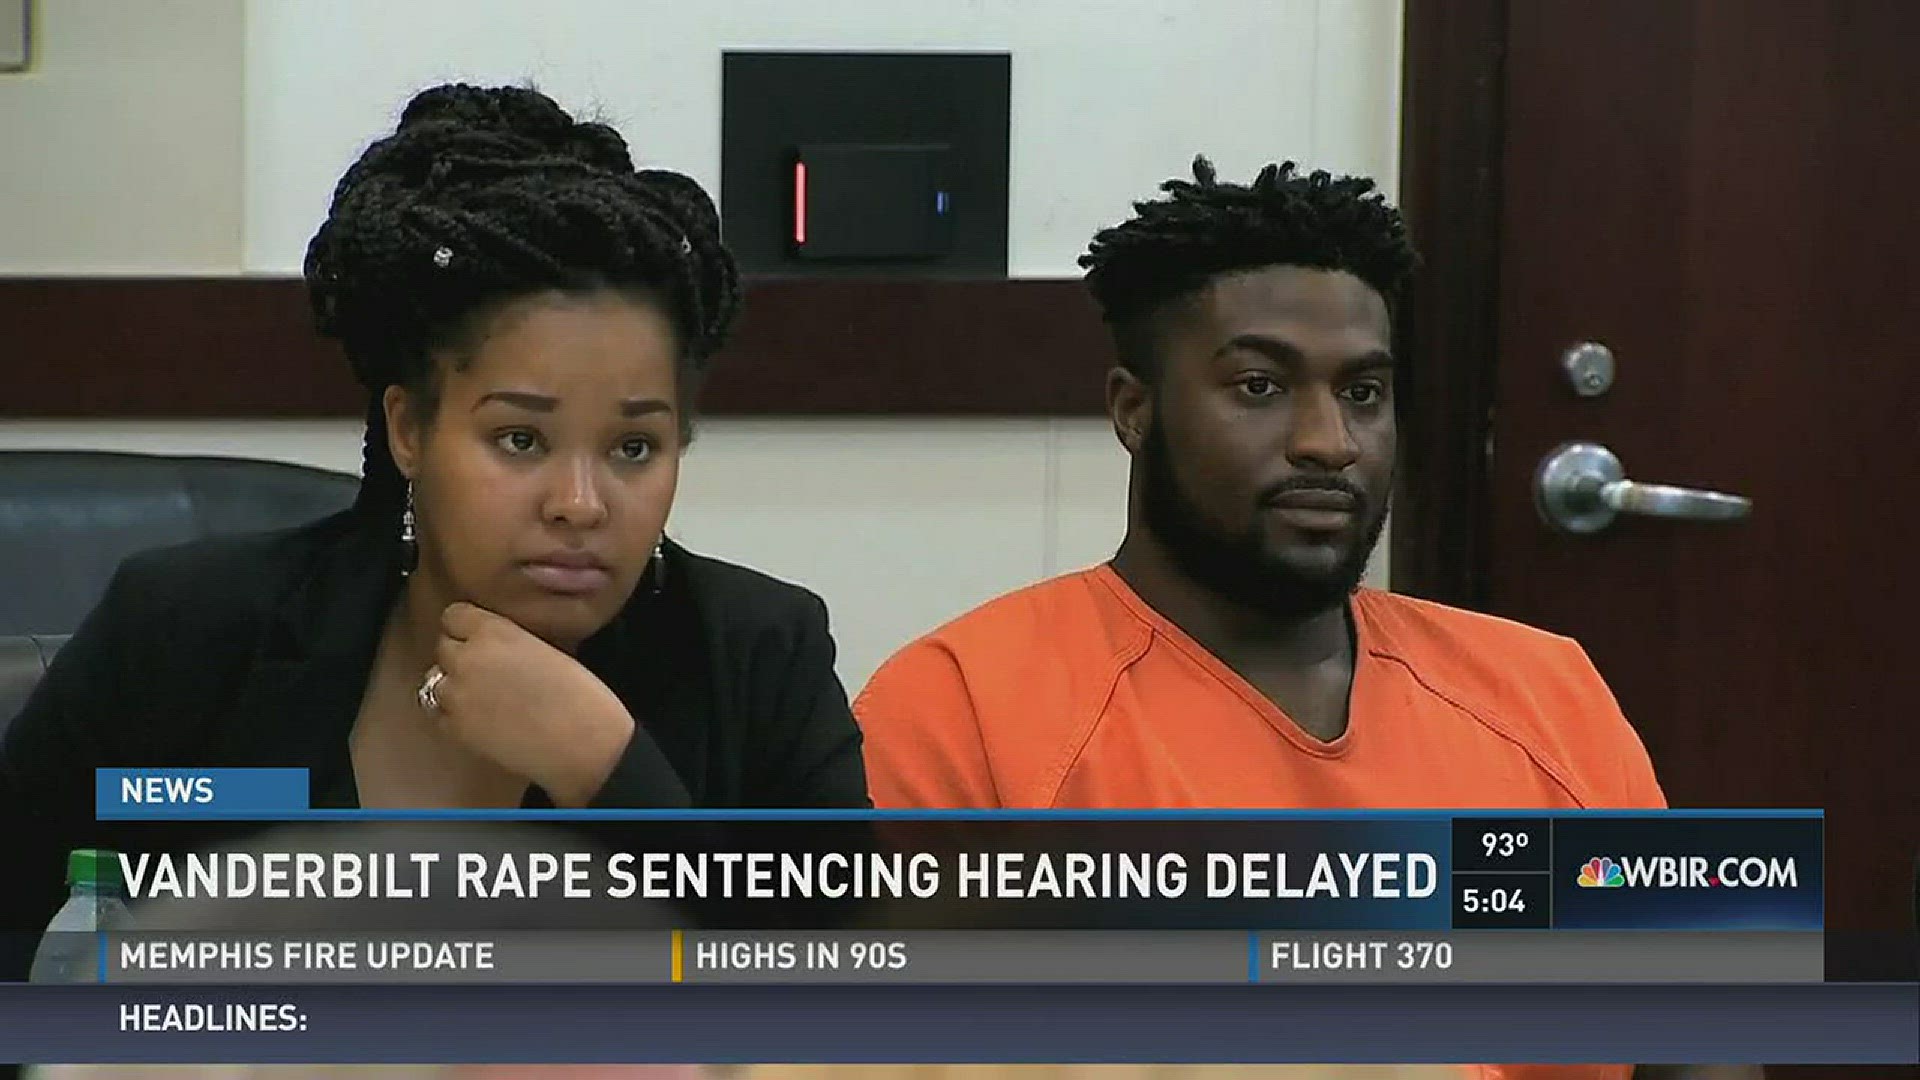 A Nashville judge says he will decide next week whether to order a new sentencing hearing for Cory Batey, a former Vanderbilt University football player found guilty of aggravated rape in the assault of a woman while she was unconscious in 2013.